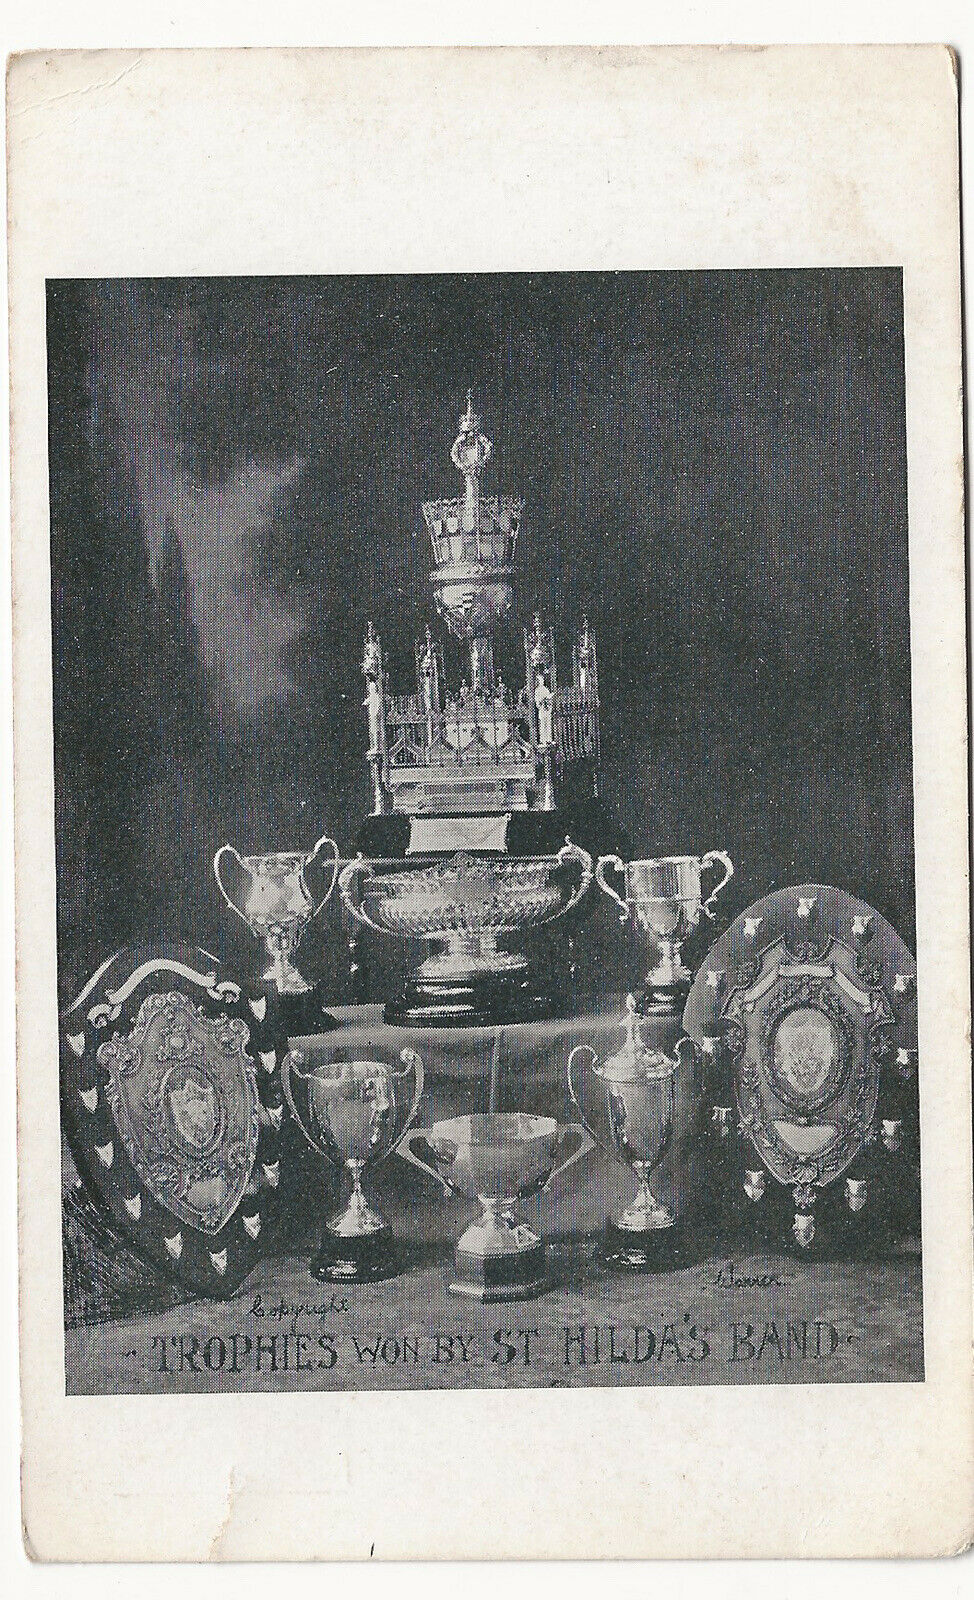 House Clearance - Service Trophies Won by St Hilda’s Colliery Brass Band County Durham